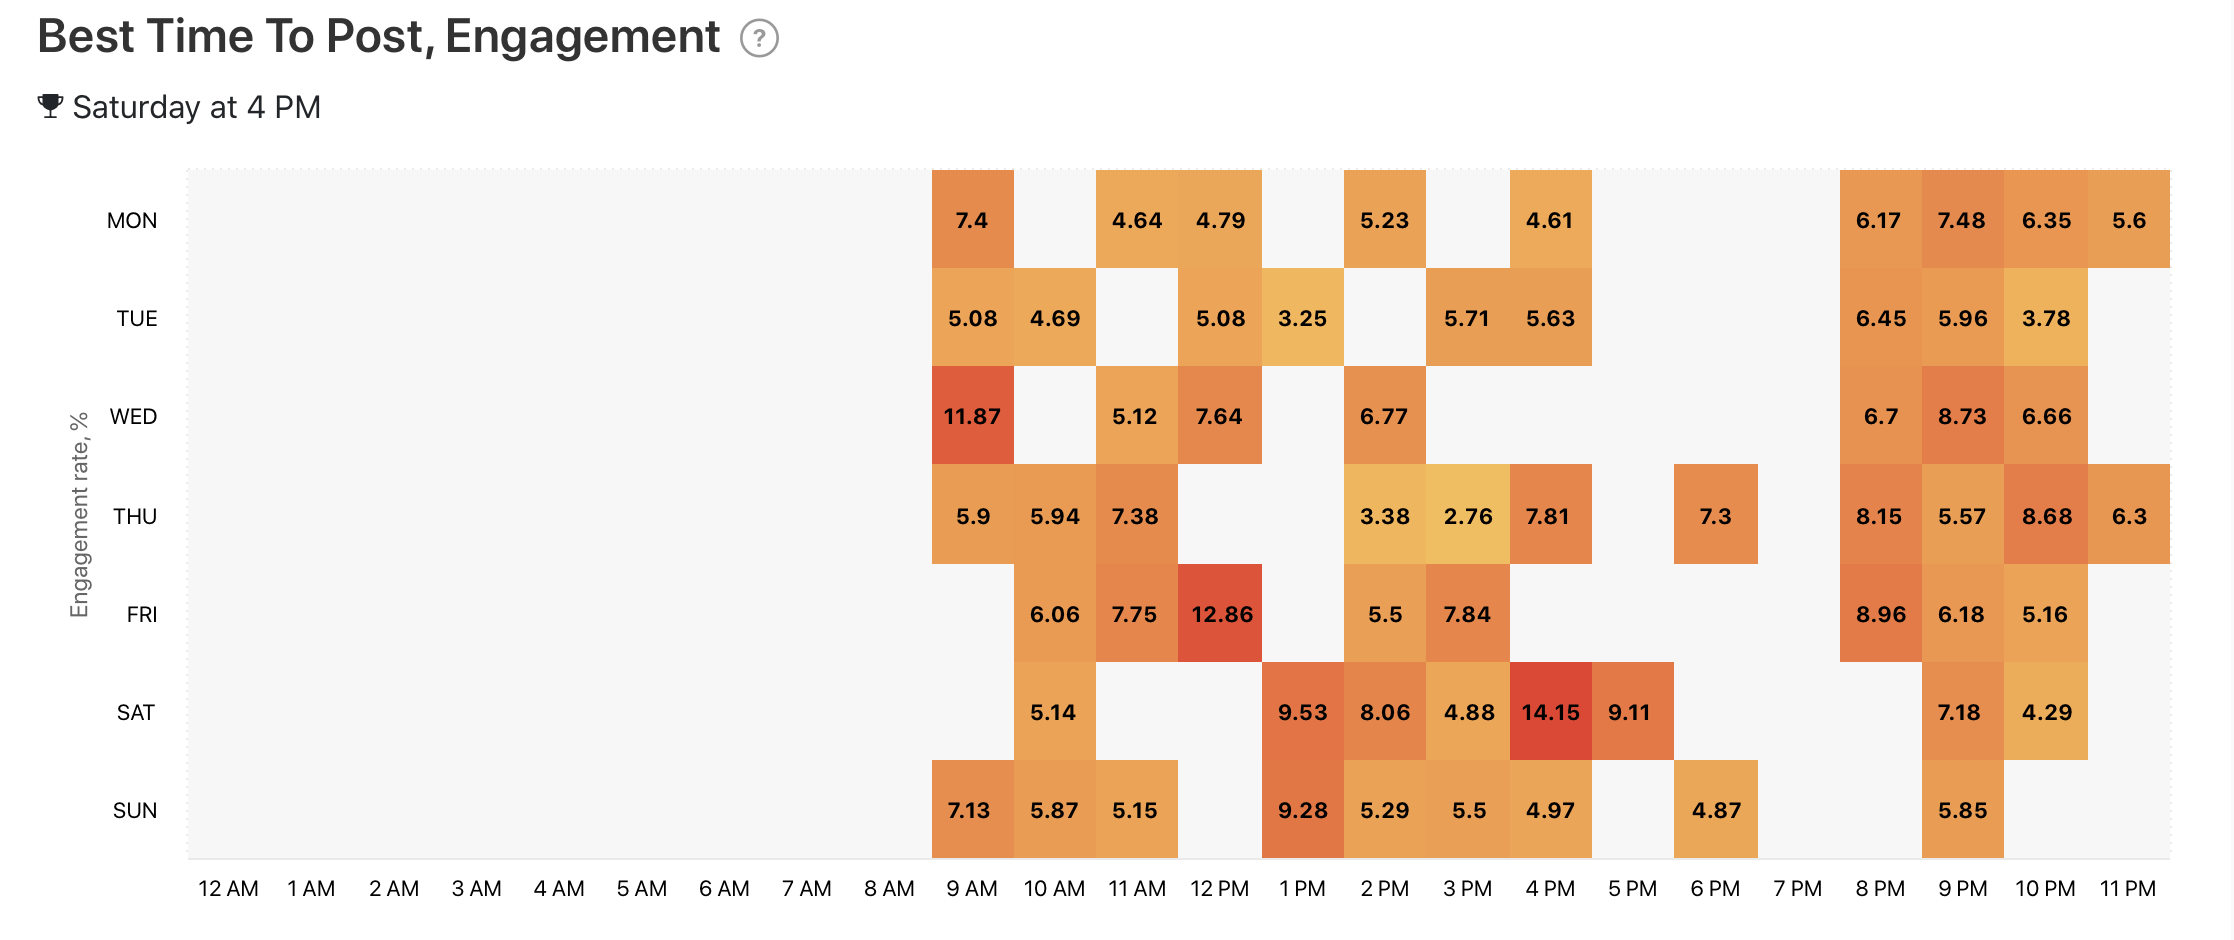 Best Time To Post, Engagement graph by Minter.io